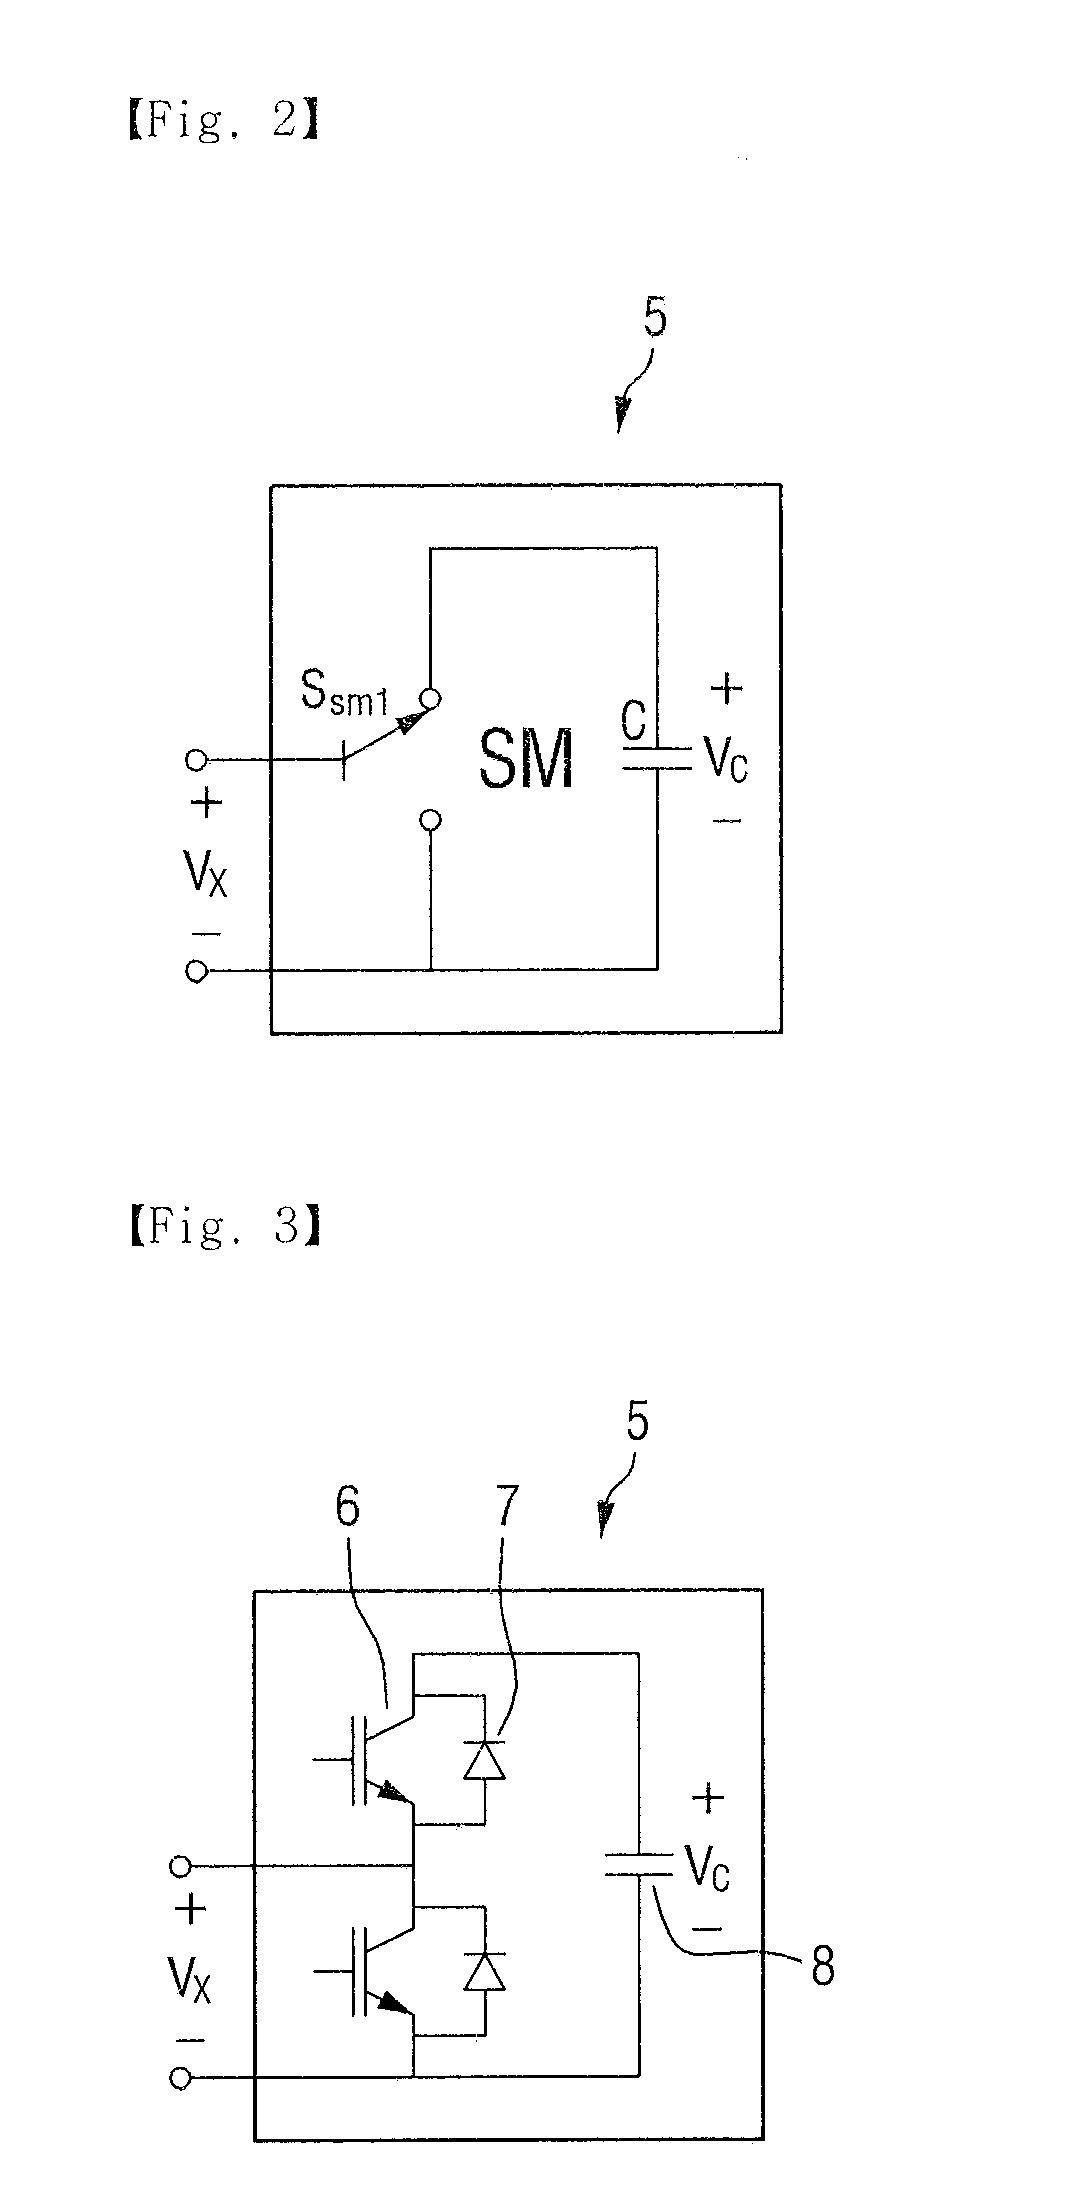 Fault current reduction structure of multi-level converter and apparatus using the fault current reduction structure